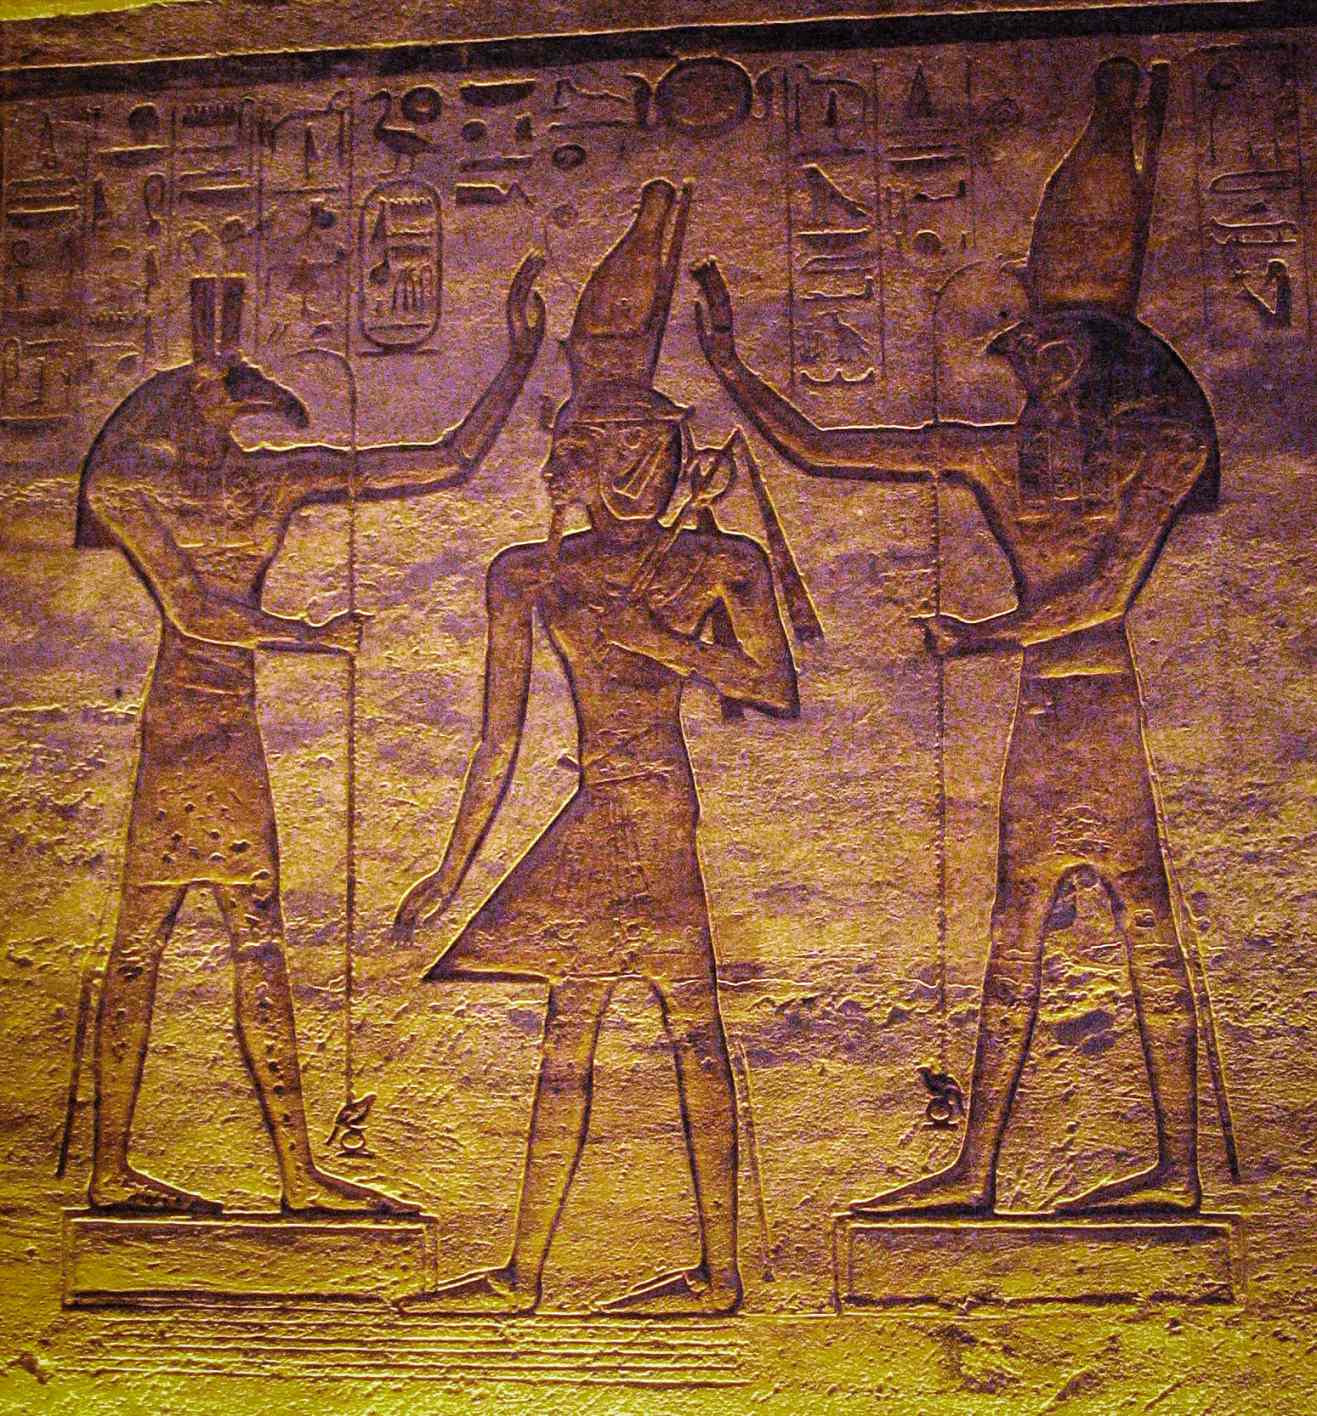 Set (Seth) and Horus adoring Ramesses. The current study shows that the moon may have been represented by Seth and the variable star Algol by Horus in the Cairo Calendar.